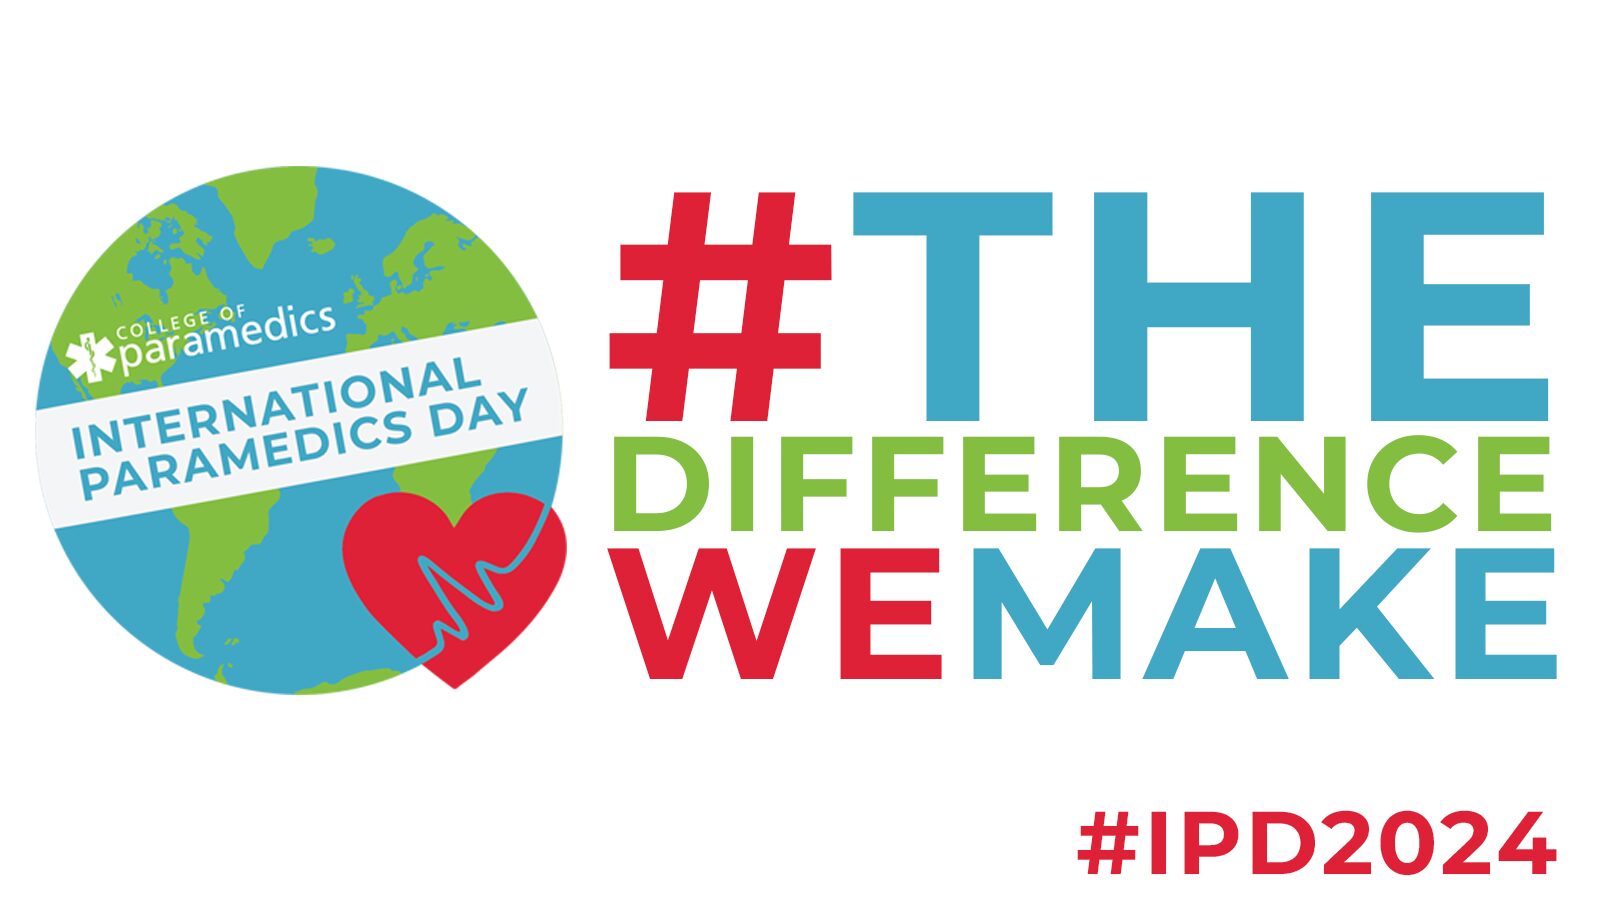 INTERNATIONAL PARAMEDICS DAY TO SHOWCASE ‘THE DIFFERENCE WE MAKE’